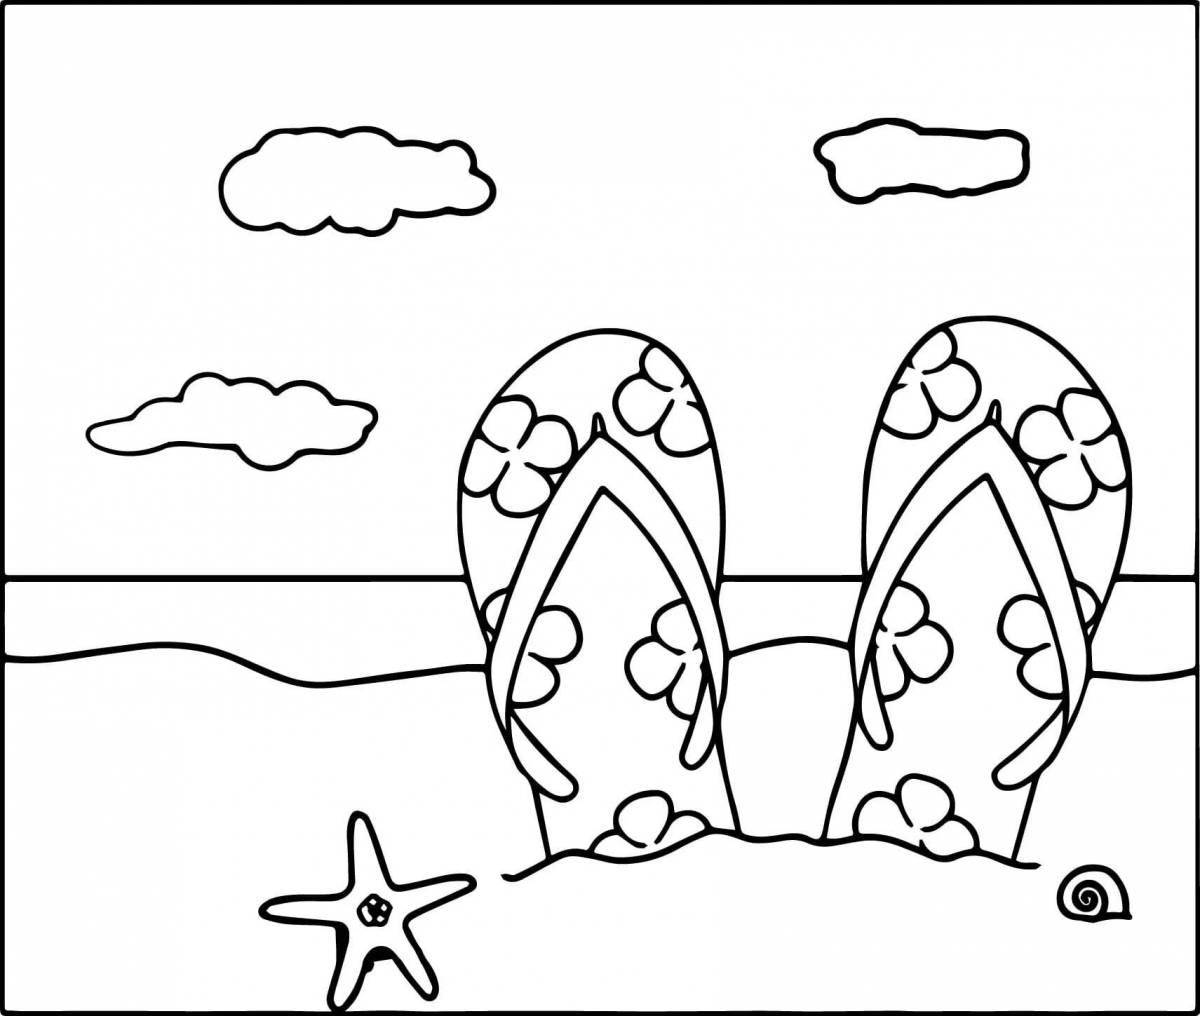 Coloring page charming sea beach